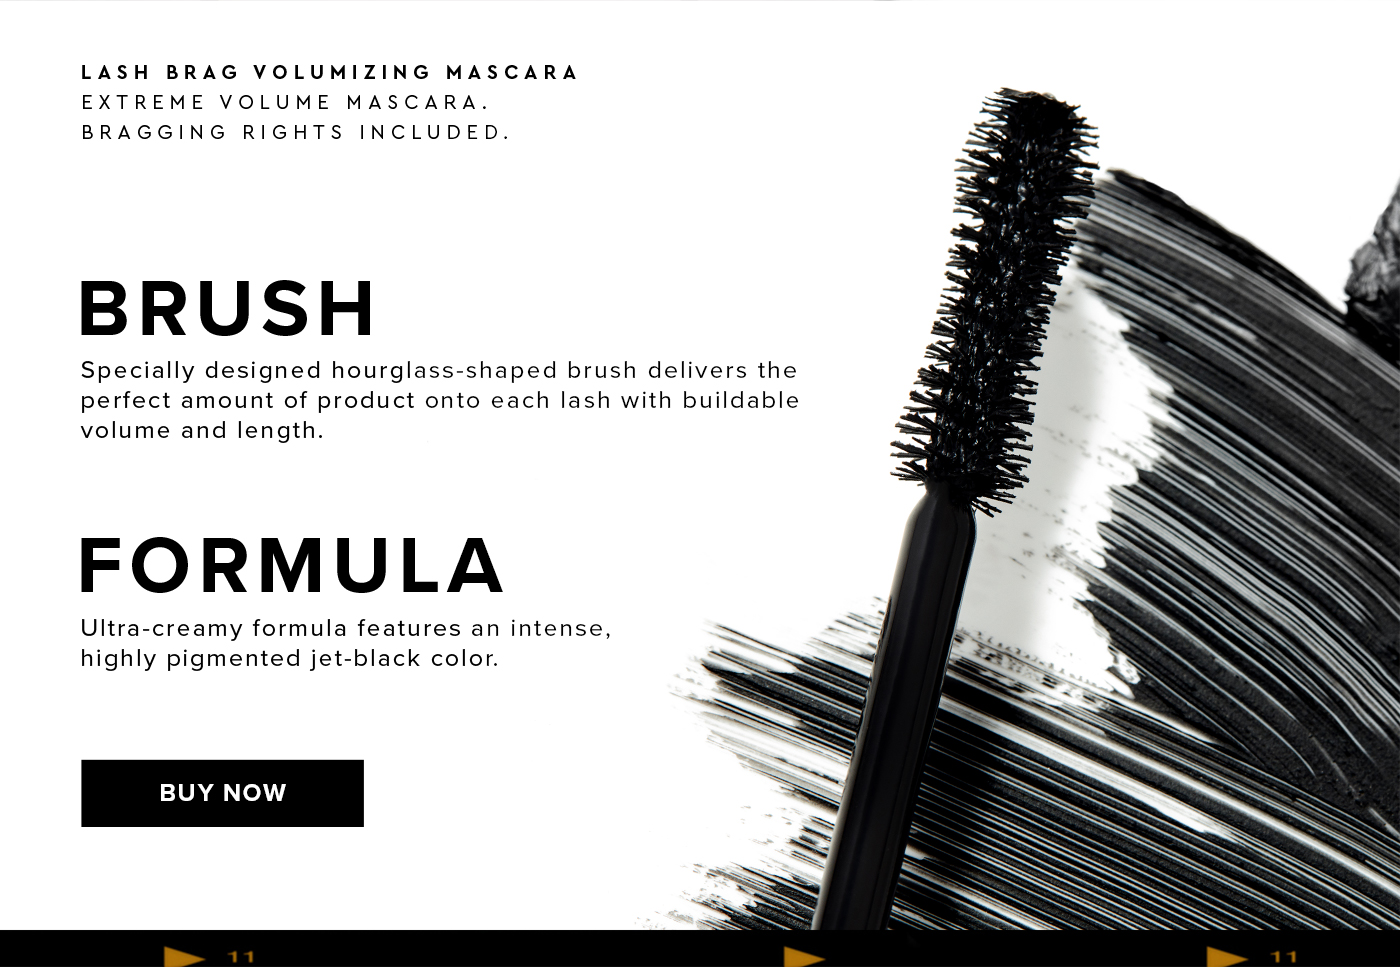 LASH BRAG VOLUMIZING MASCARA. EXTREME VOLUME MASCARA. BRAGGING RIGHTS INCLUDED. BRUSH. Specially designed hourglass-shaped brush delivers the perfect amount of product onto each lash with buildable volume and length. FORMULA. Ultra-creamy formula features an intense, highly pigmented jet-black color. BUY NOW.